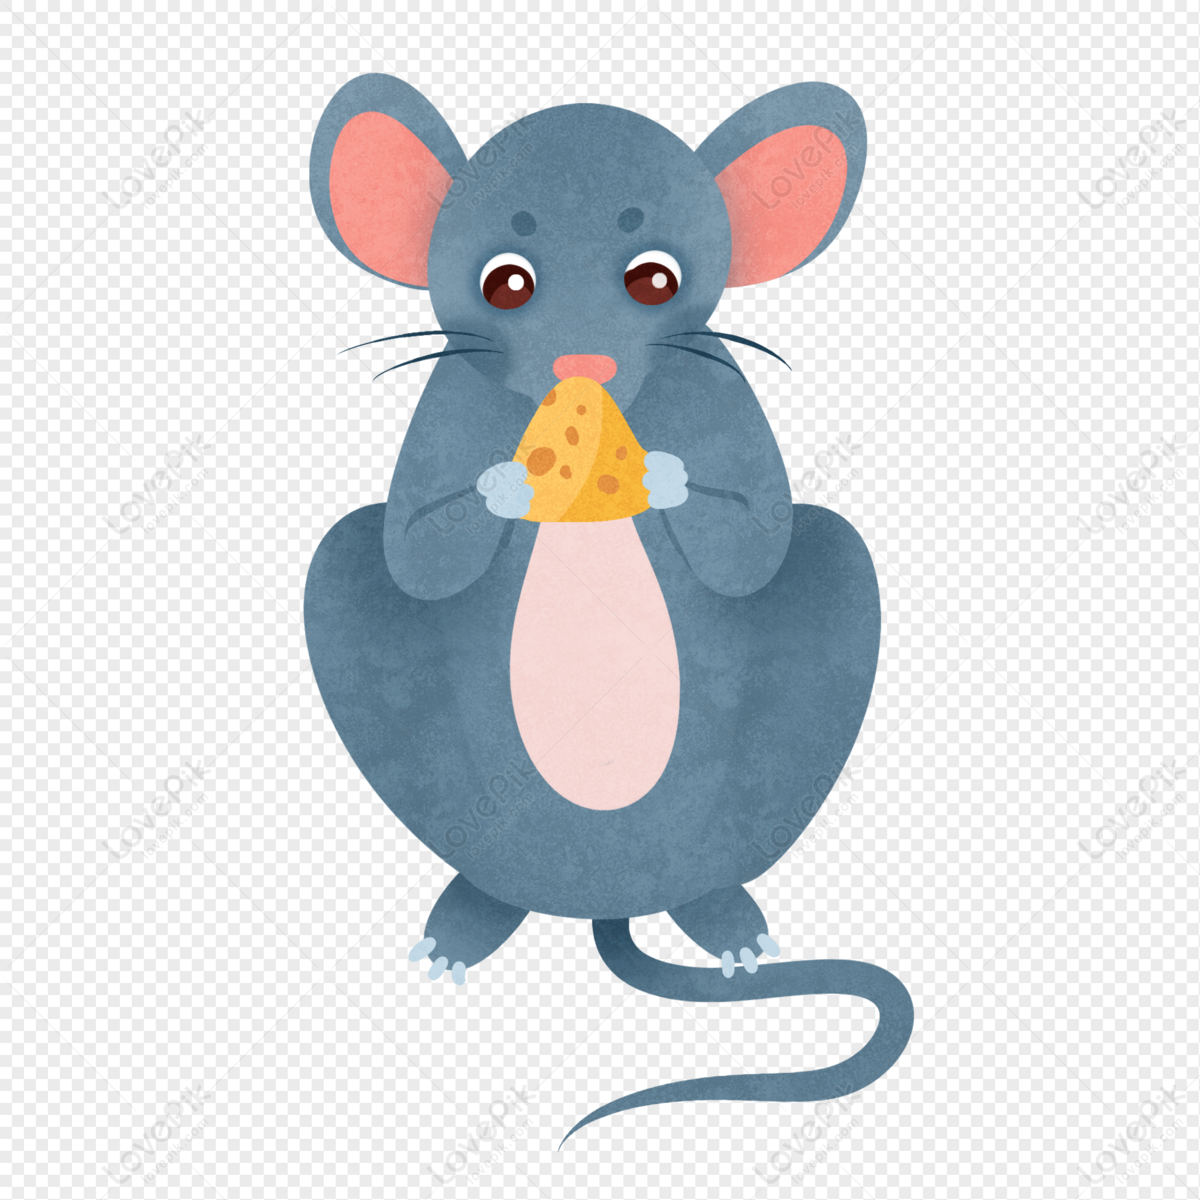 Little Mouse PNG Transparent Image And Clipart Image For Free Download -  Lovepik | 401555167